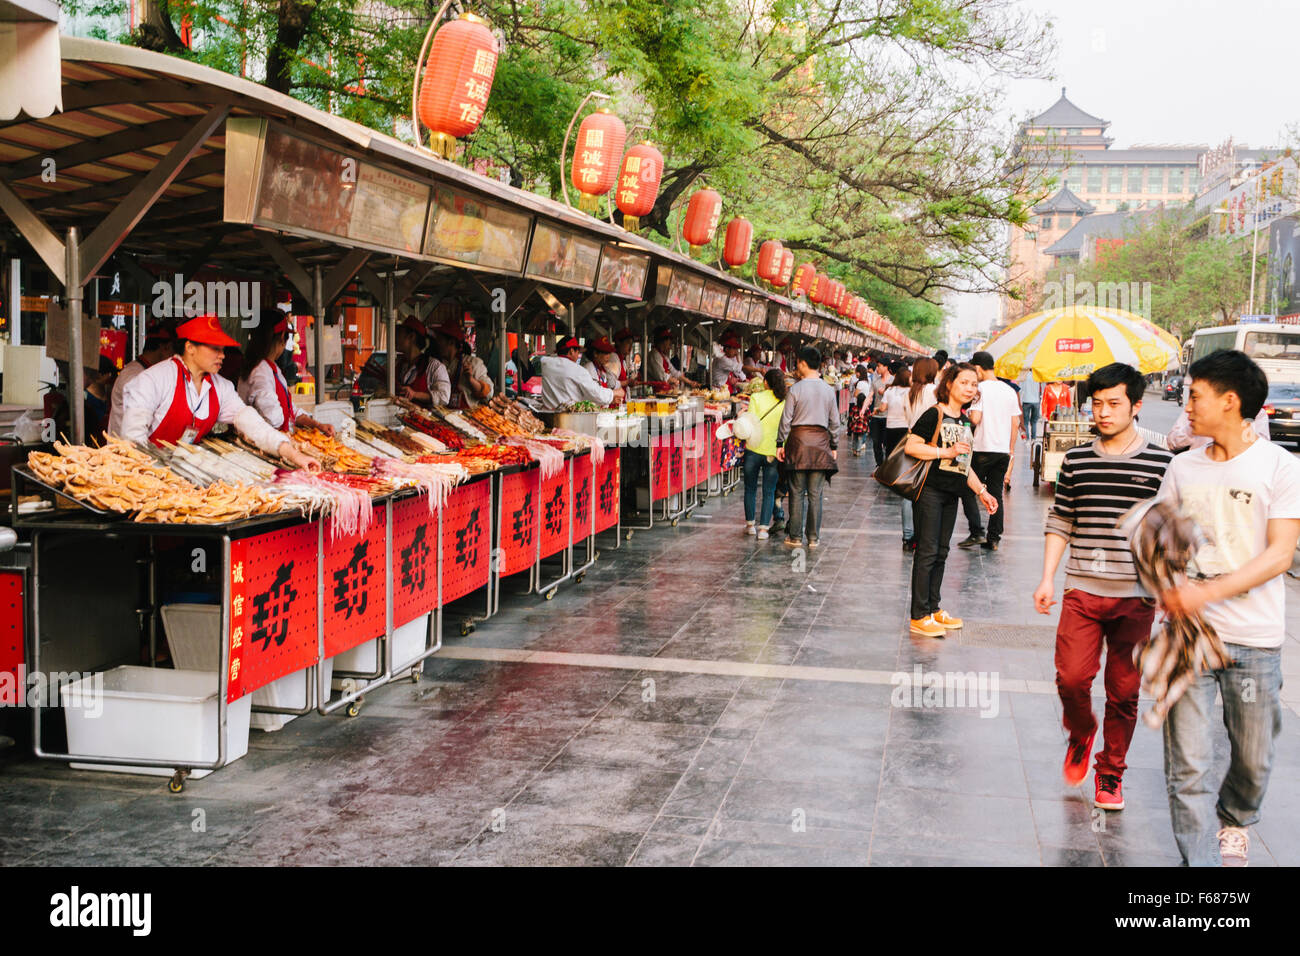 Beijing, China - The view of Donghuamen snack street in the daytime. They are selling many delicious traditional Beijing snacks. Stock Photo